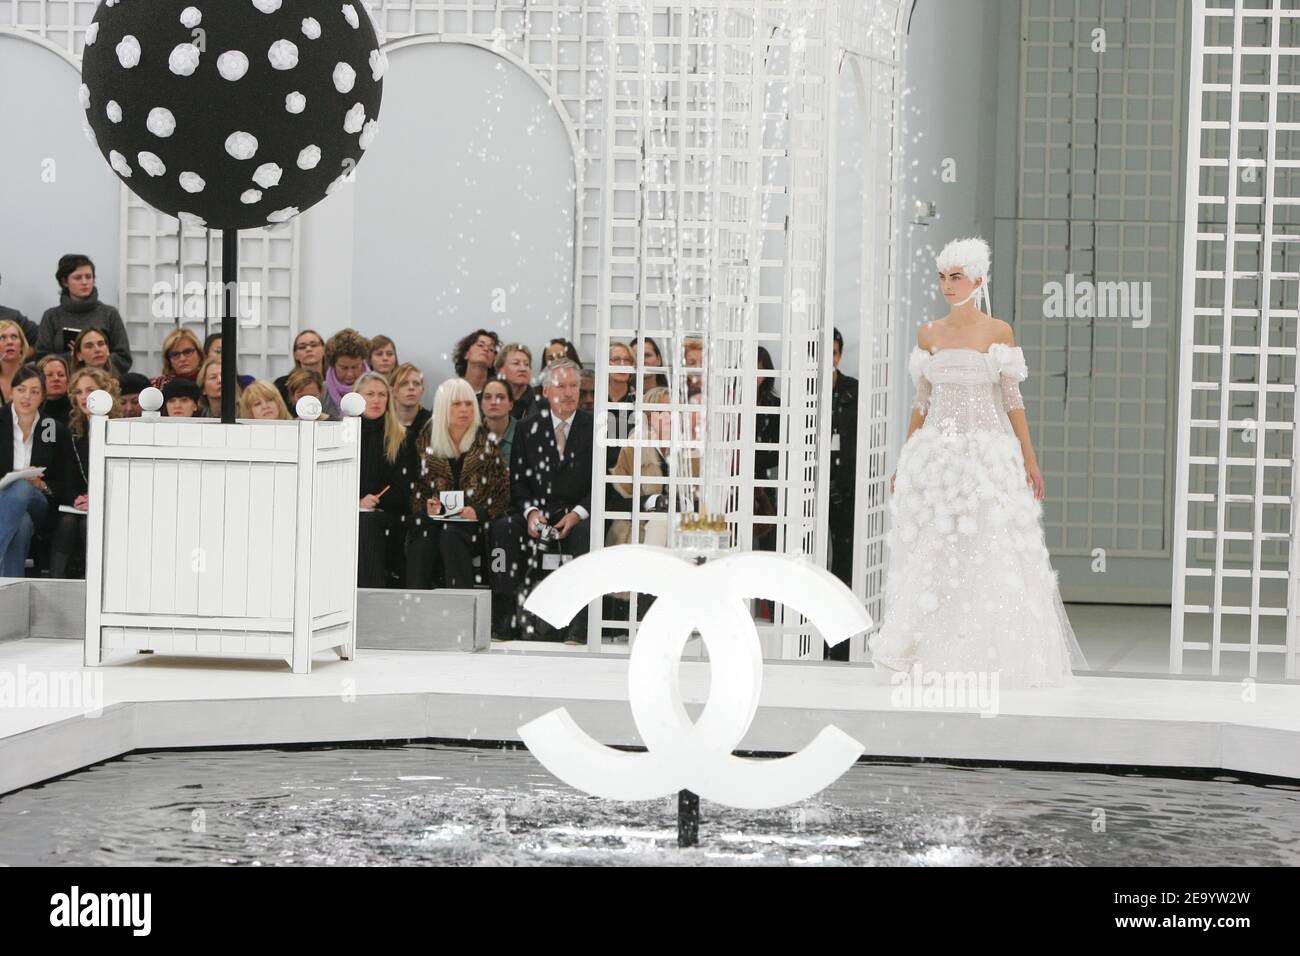 A model displays a creation by German designer Karl Lagerfeld for Chanel Haute-Couture Spring-Summer 2005 collection presentation in Paris, France, January 25, 2005. Photo by Java/ABACA Stock Photo